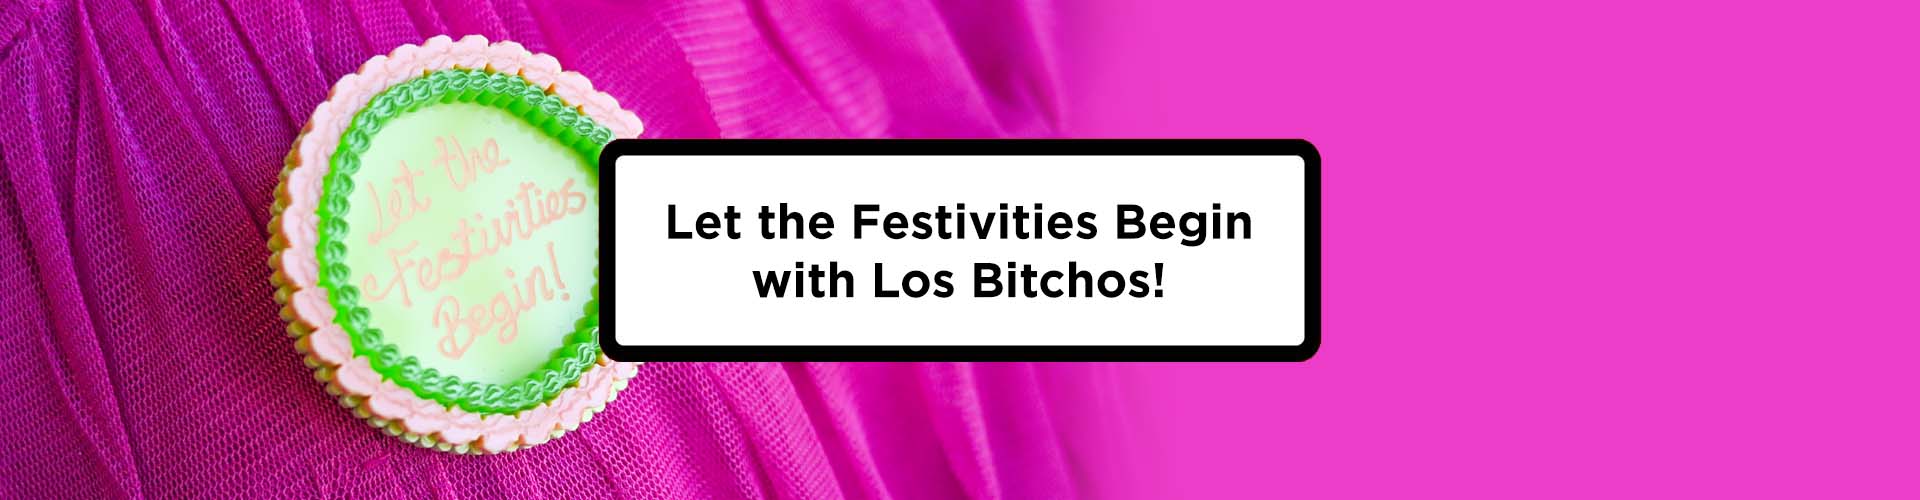 Let the Festivities Begin with Los Bitchos